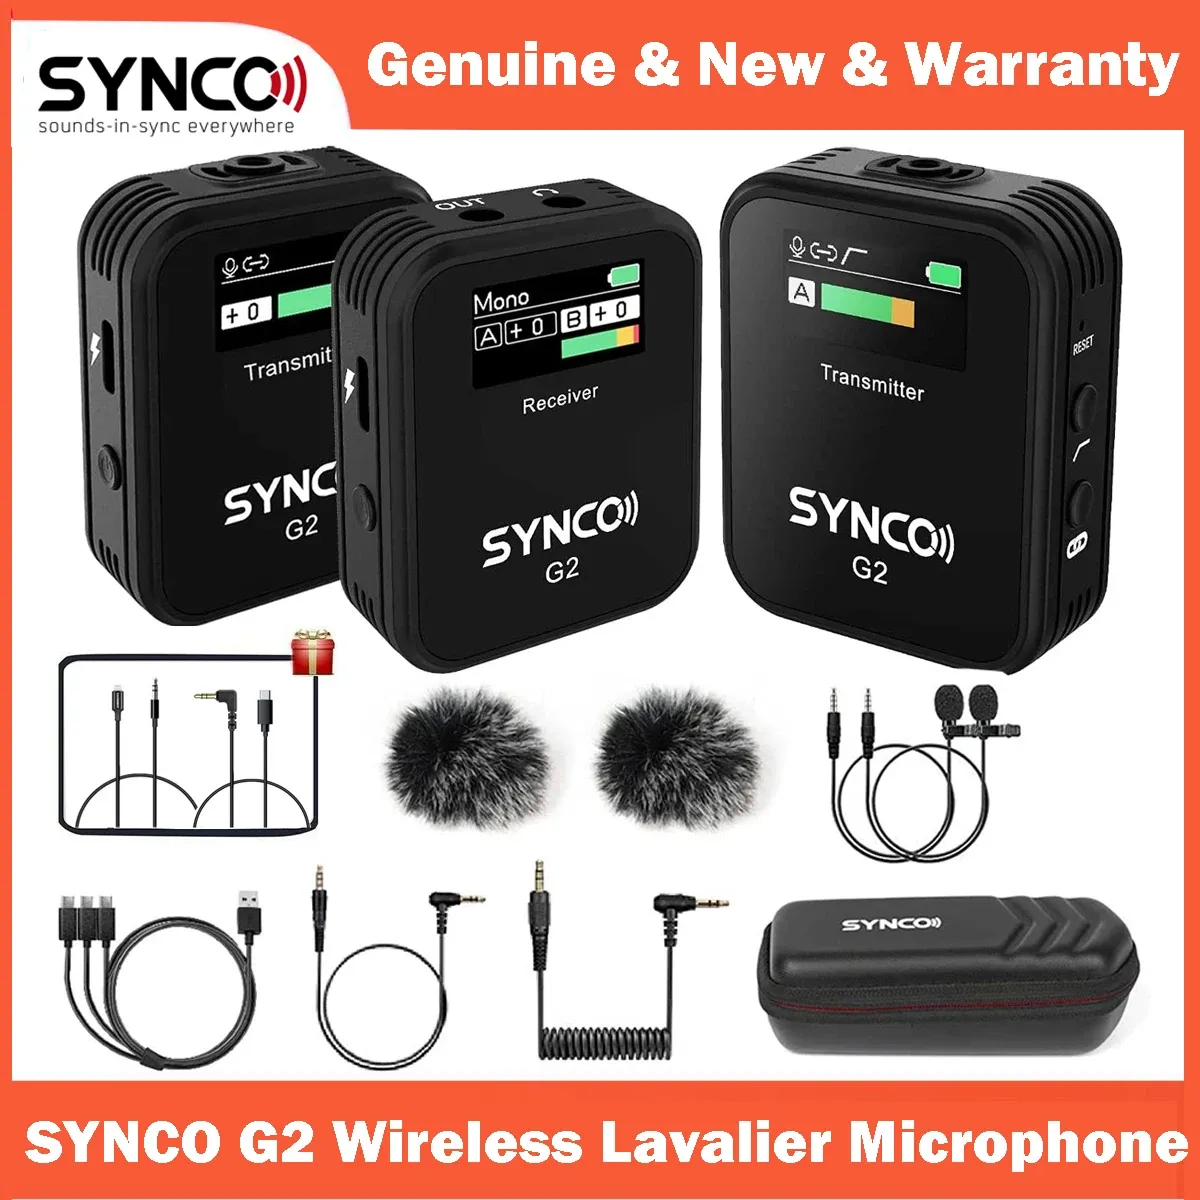 Microphones Synco G2 G2A1 G2A2 A1 A2 2.4G Système de microphone Lavalier sans fil pour smartphone Vlogging Streaming YouTube vs Rode Go II II